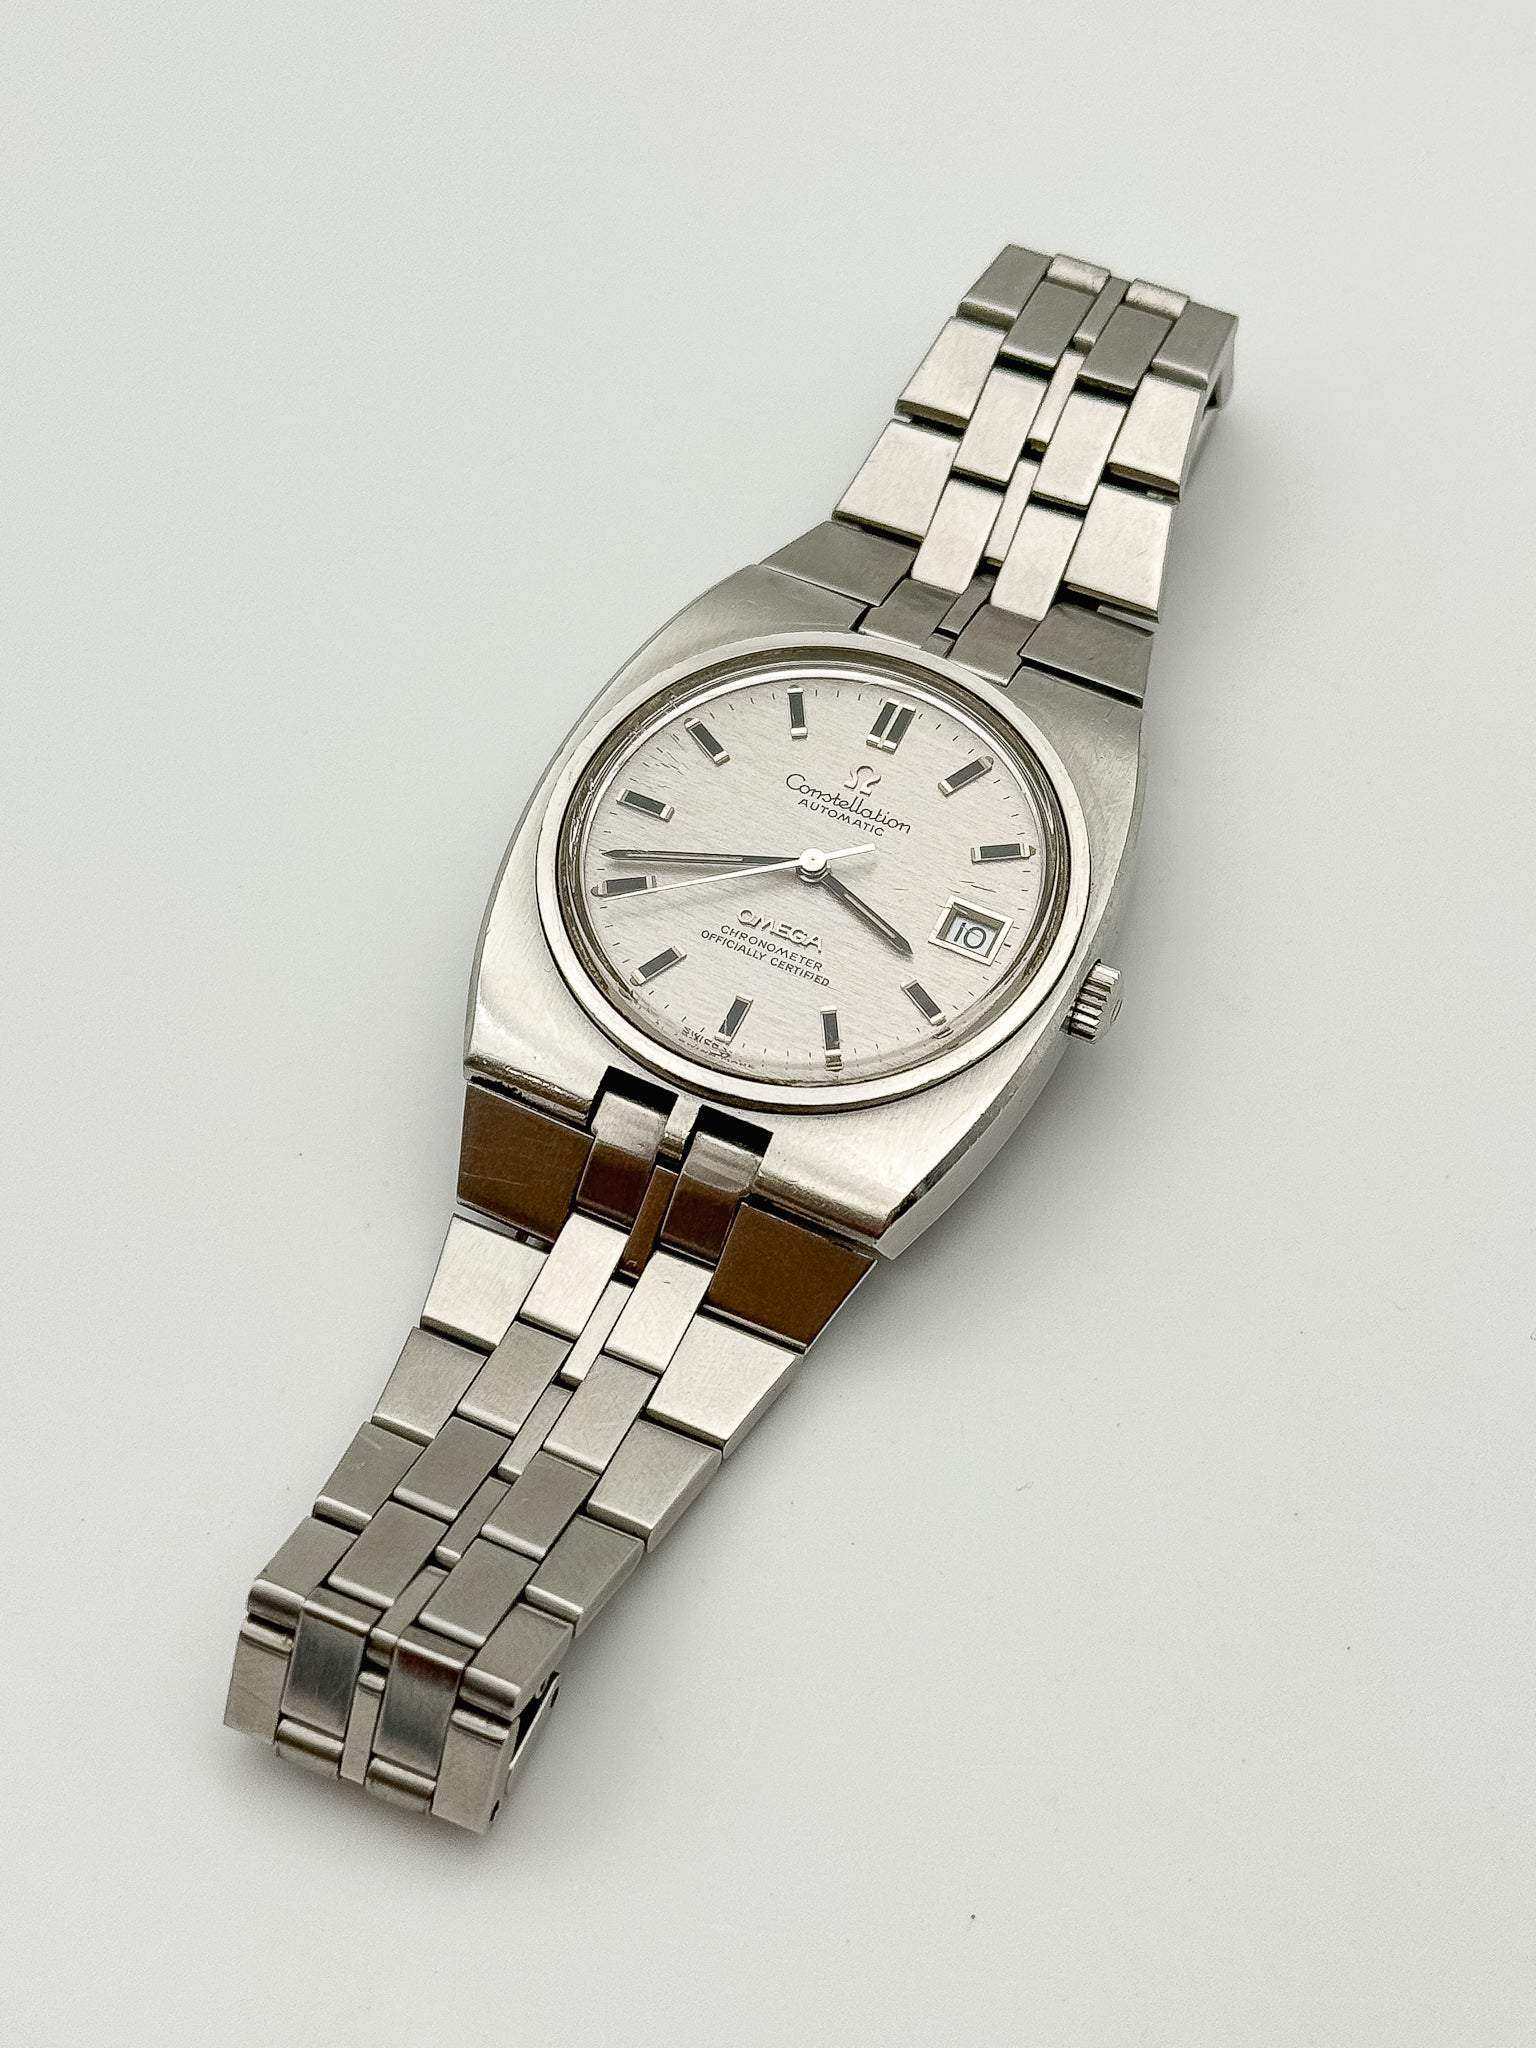 Omega - Constellation COSC Full Steel Oversize - 1970 - Atelier Victor